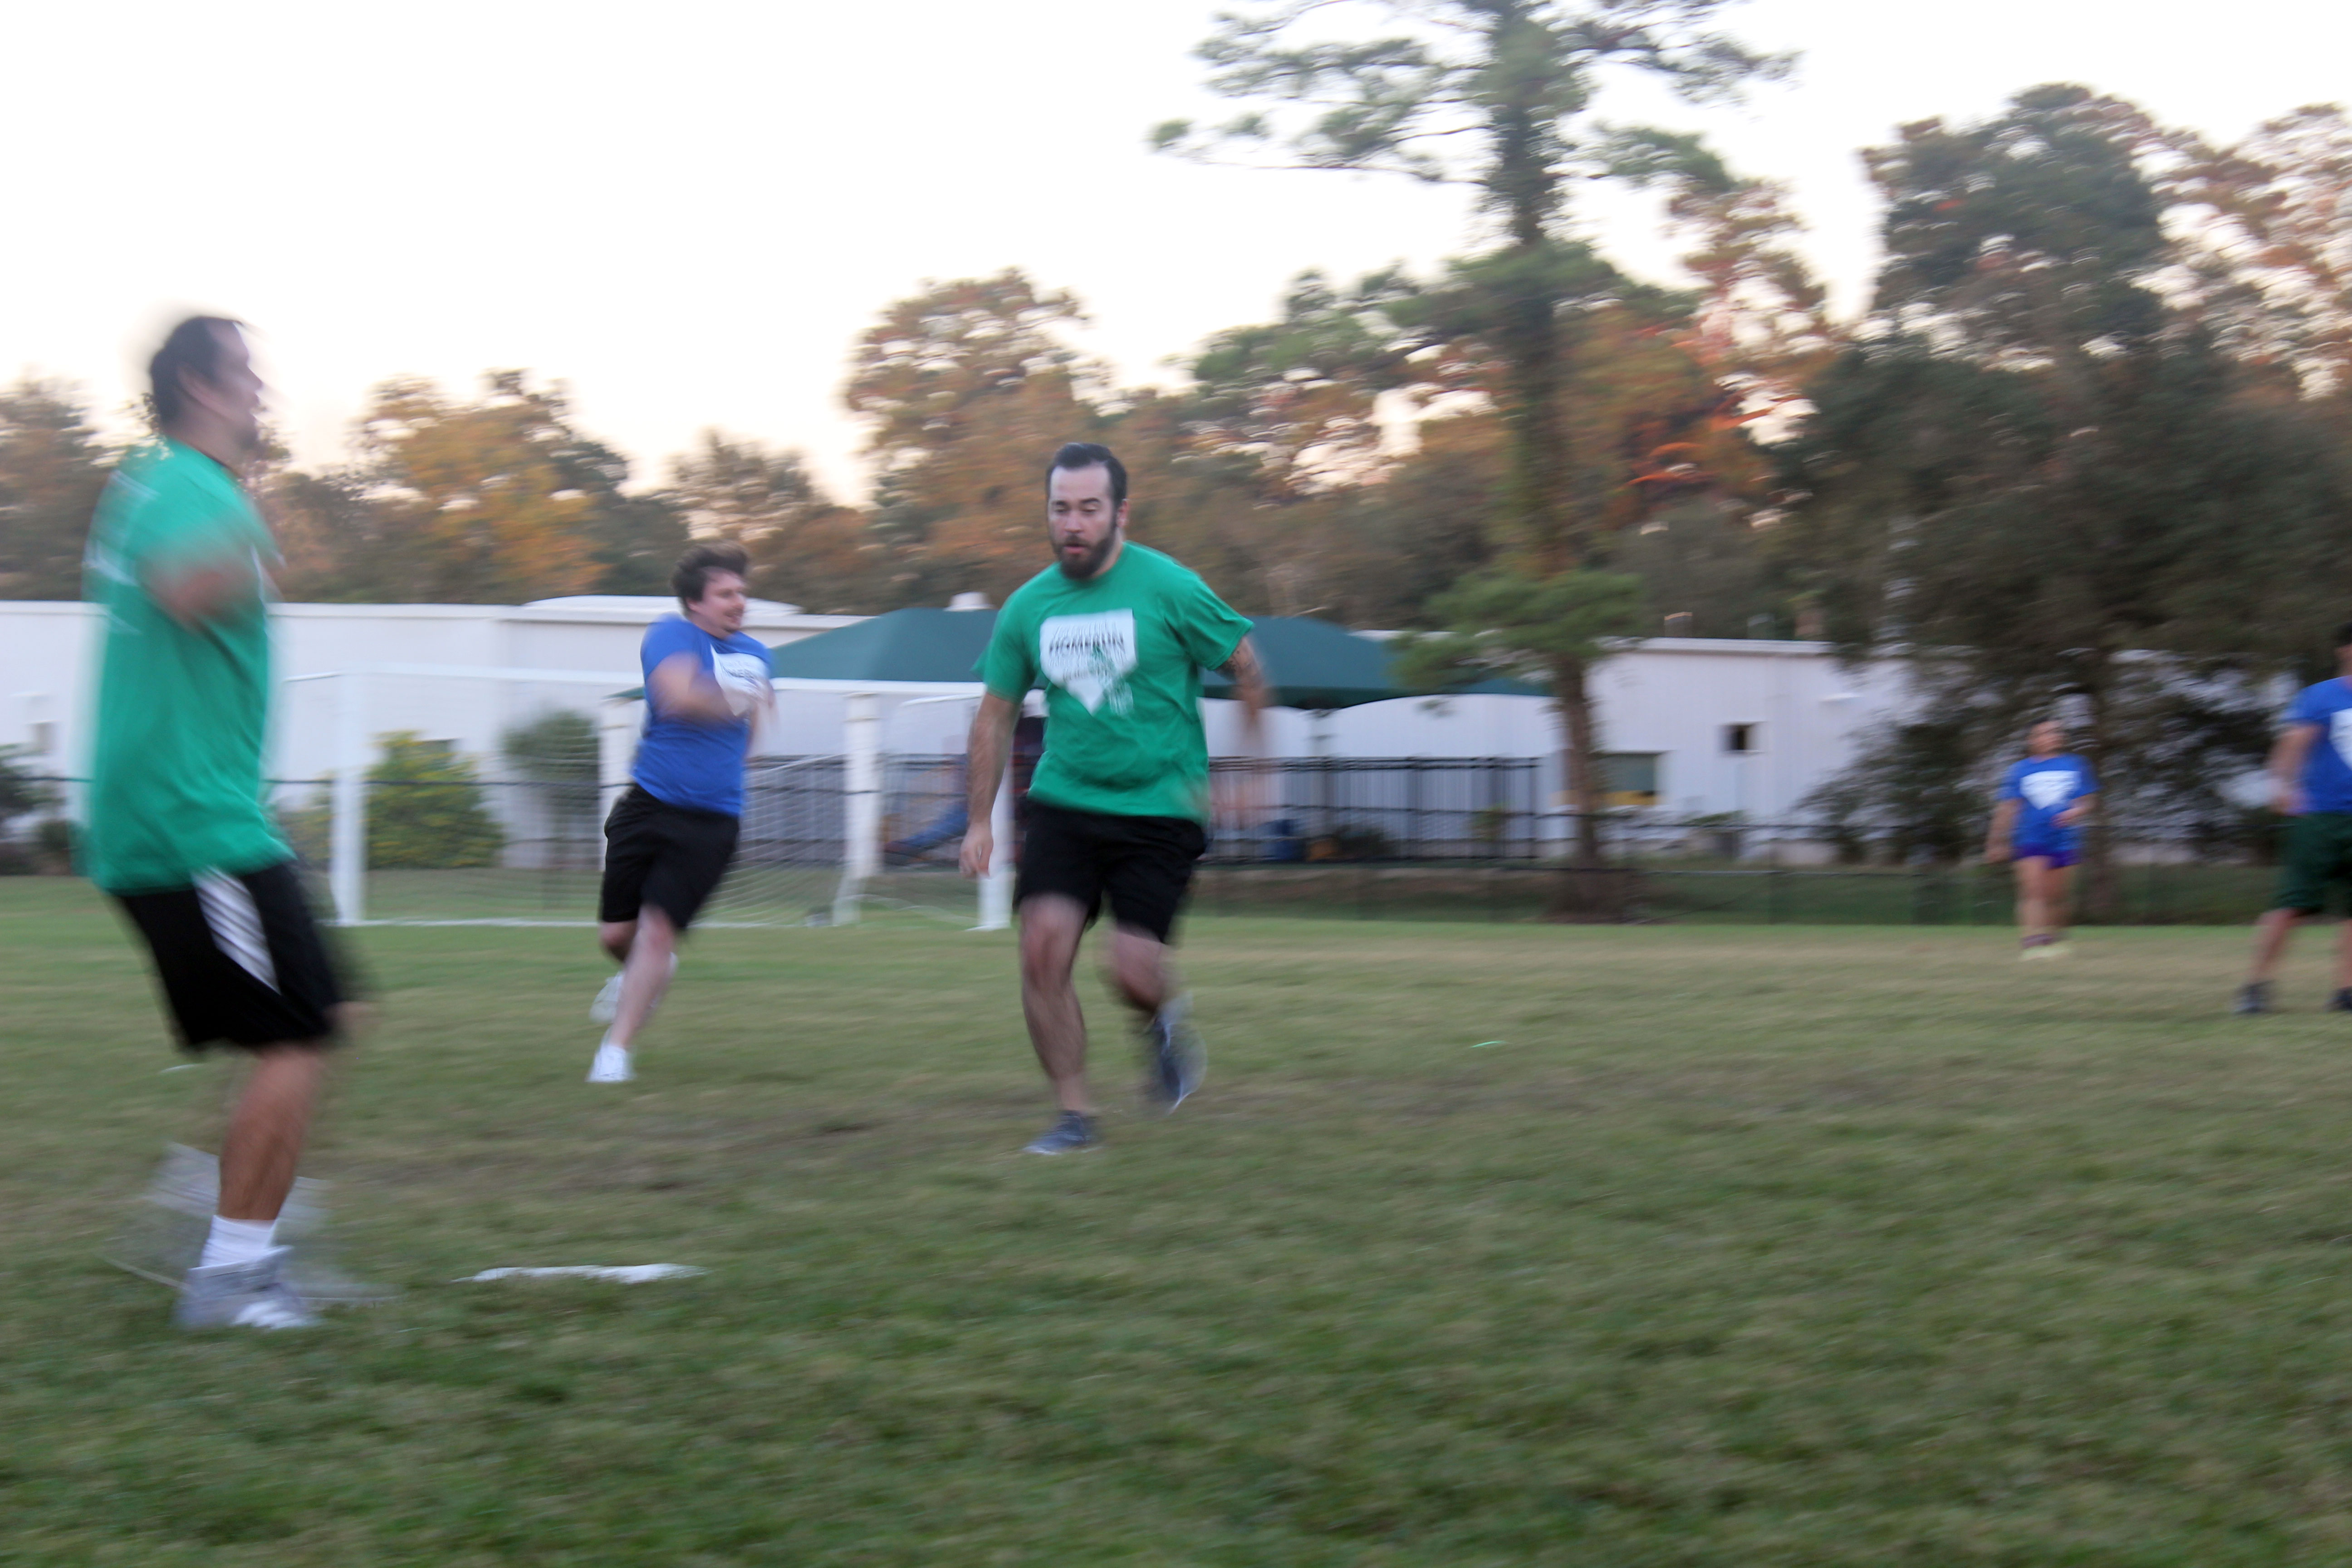 Photo: Allen Cox, math education director, rushing to home base to score for the faculty and staff team at the Faculty and Staff vs. Students Kickball Game, held Tuesday, Oct. 13 as part of Spirit Week 2015. Photo by The Signal reporter Monica Luna.